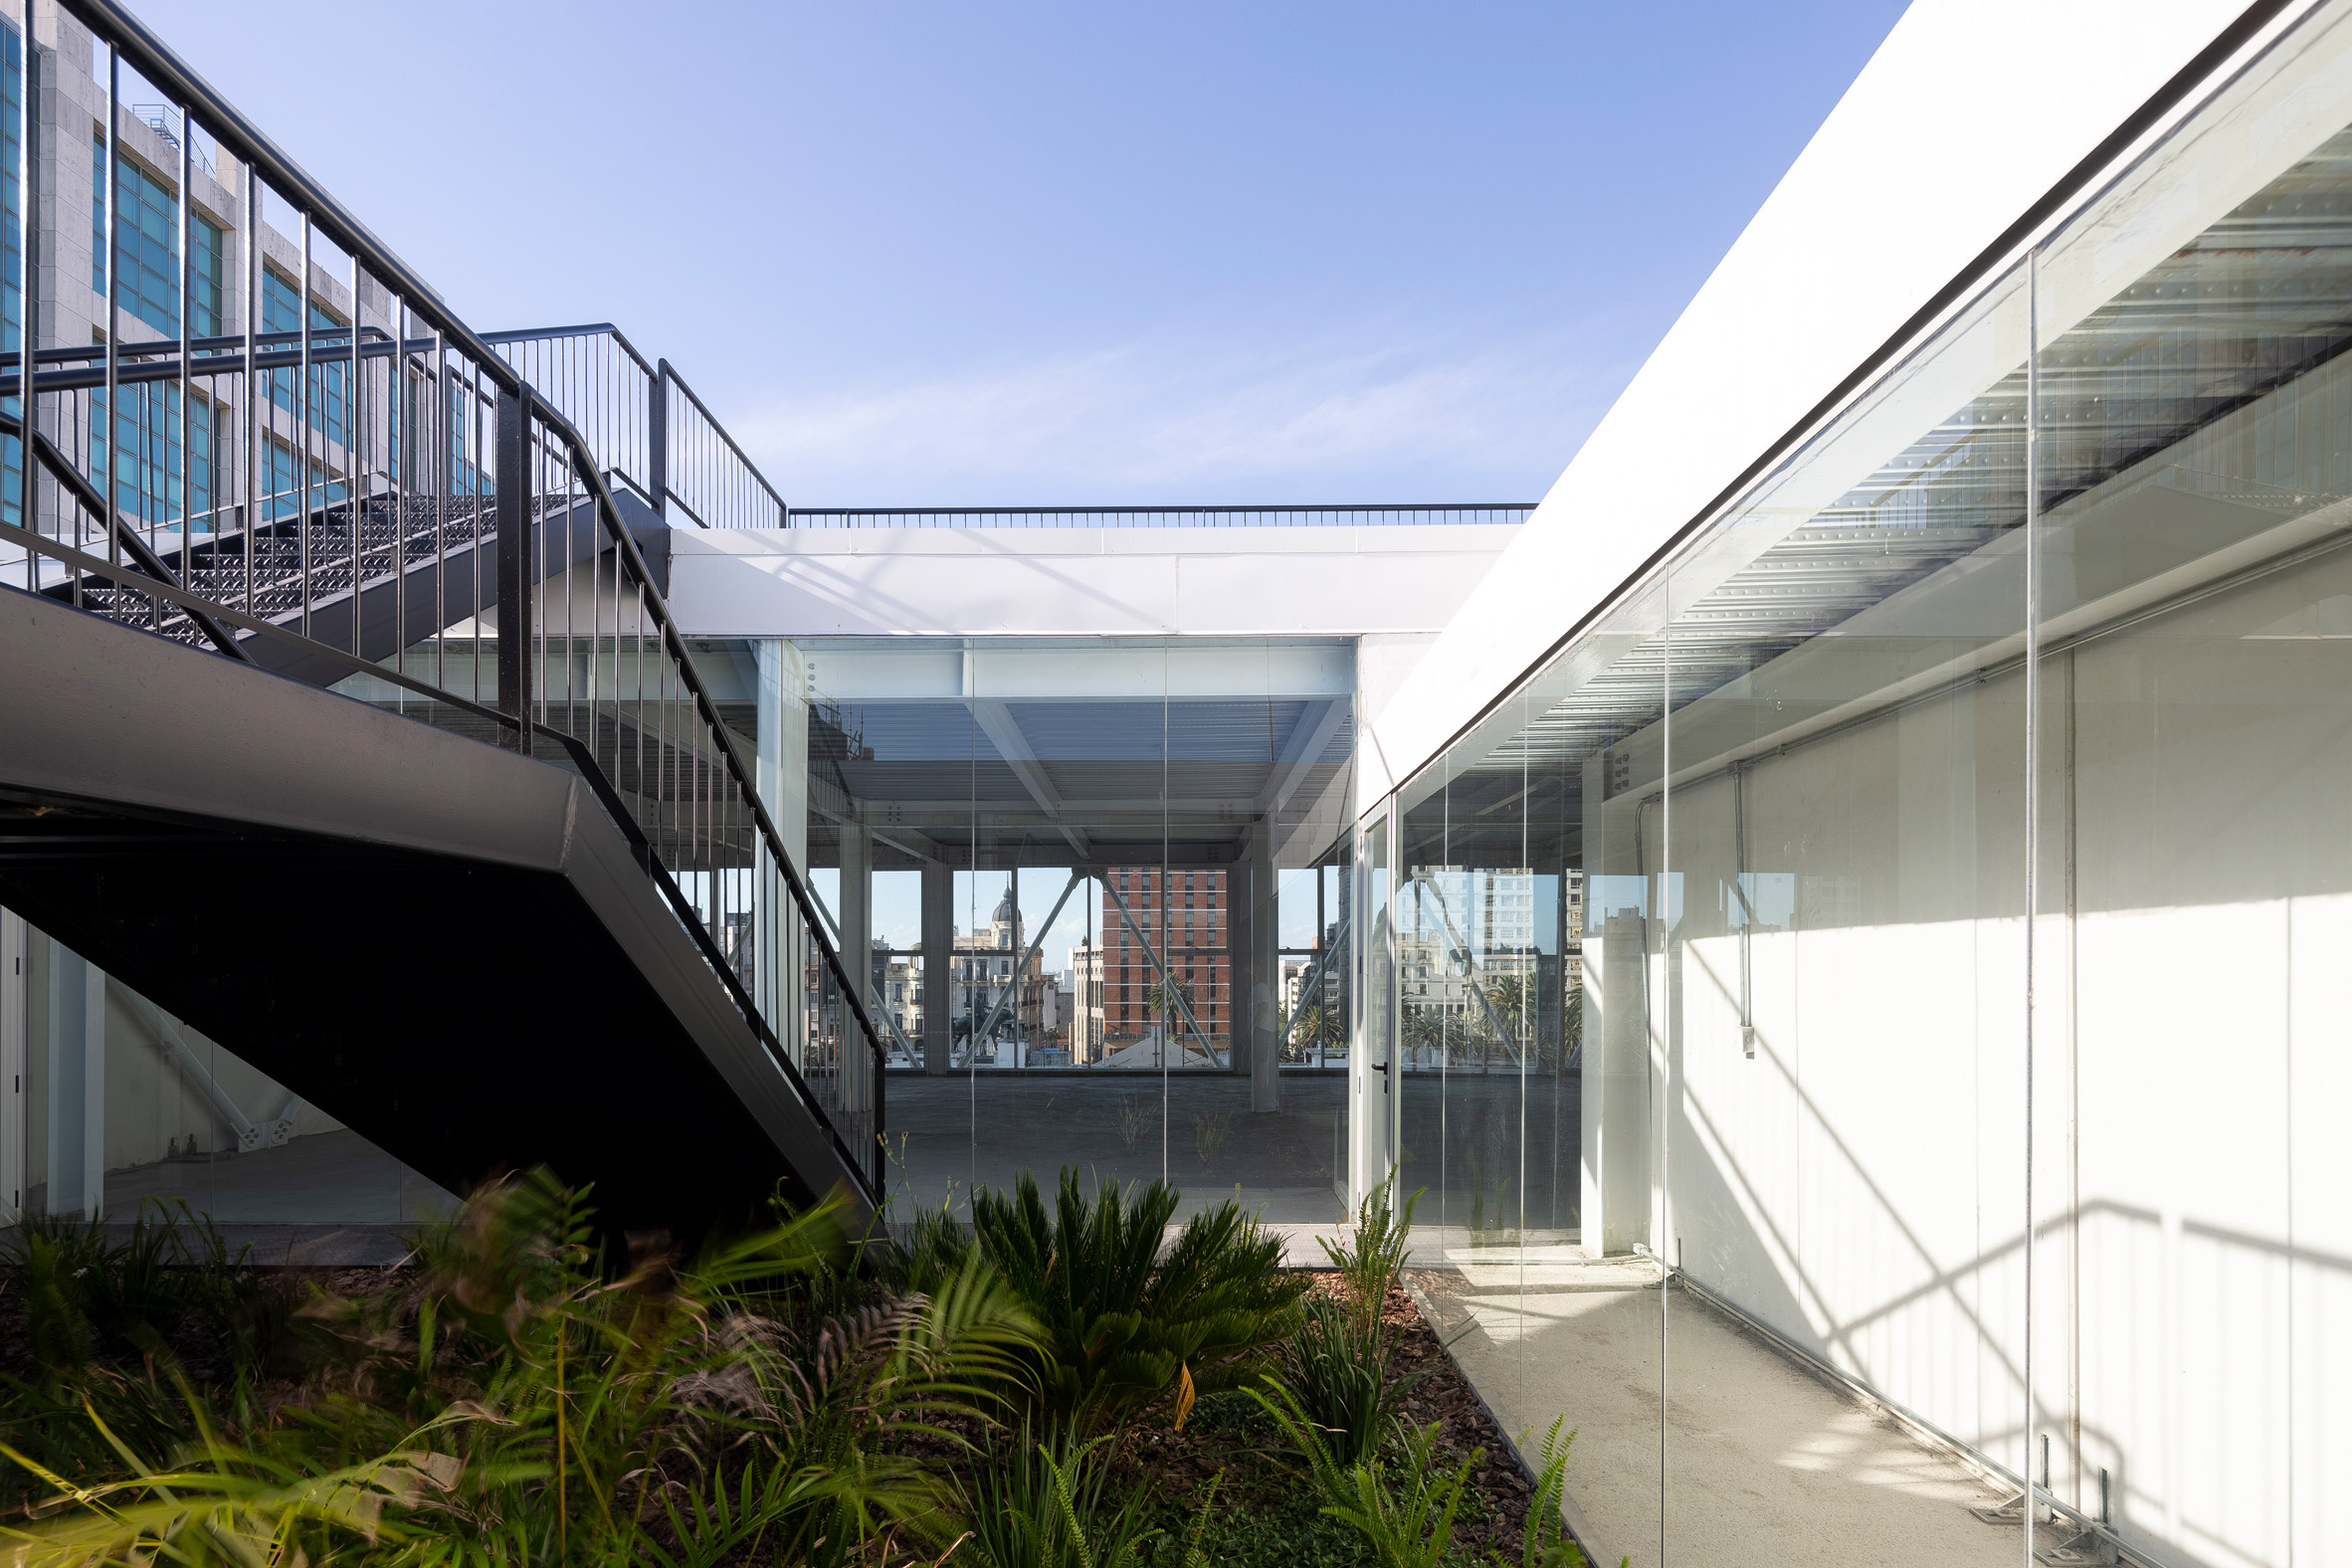 The Florida Building features a roof terrace